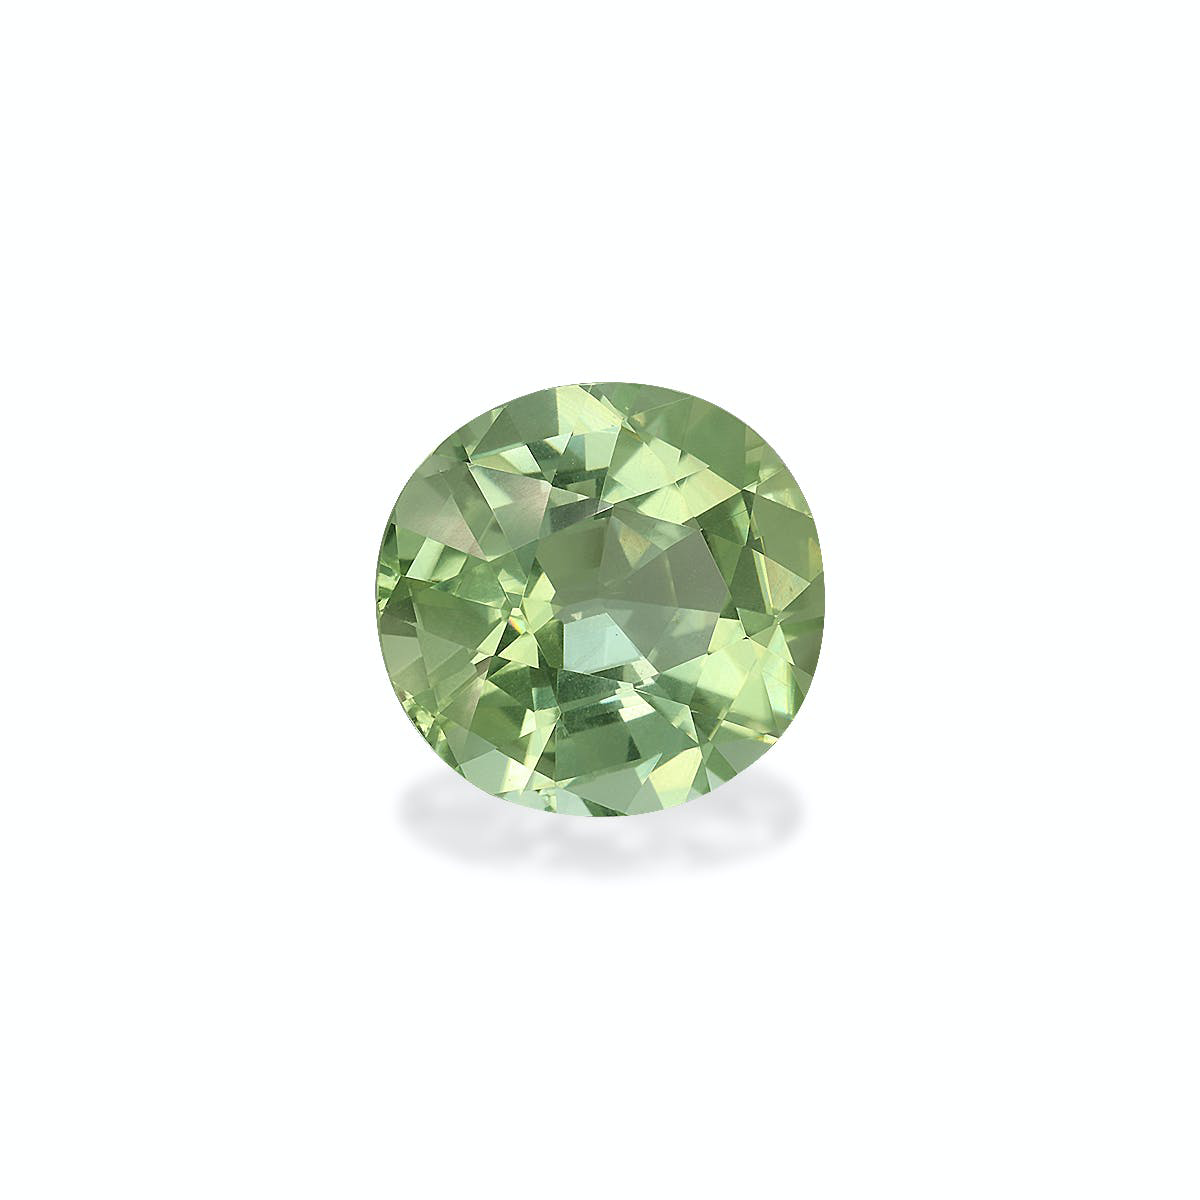 Picture of Green Tourmaline 12.27ct (TG0471)